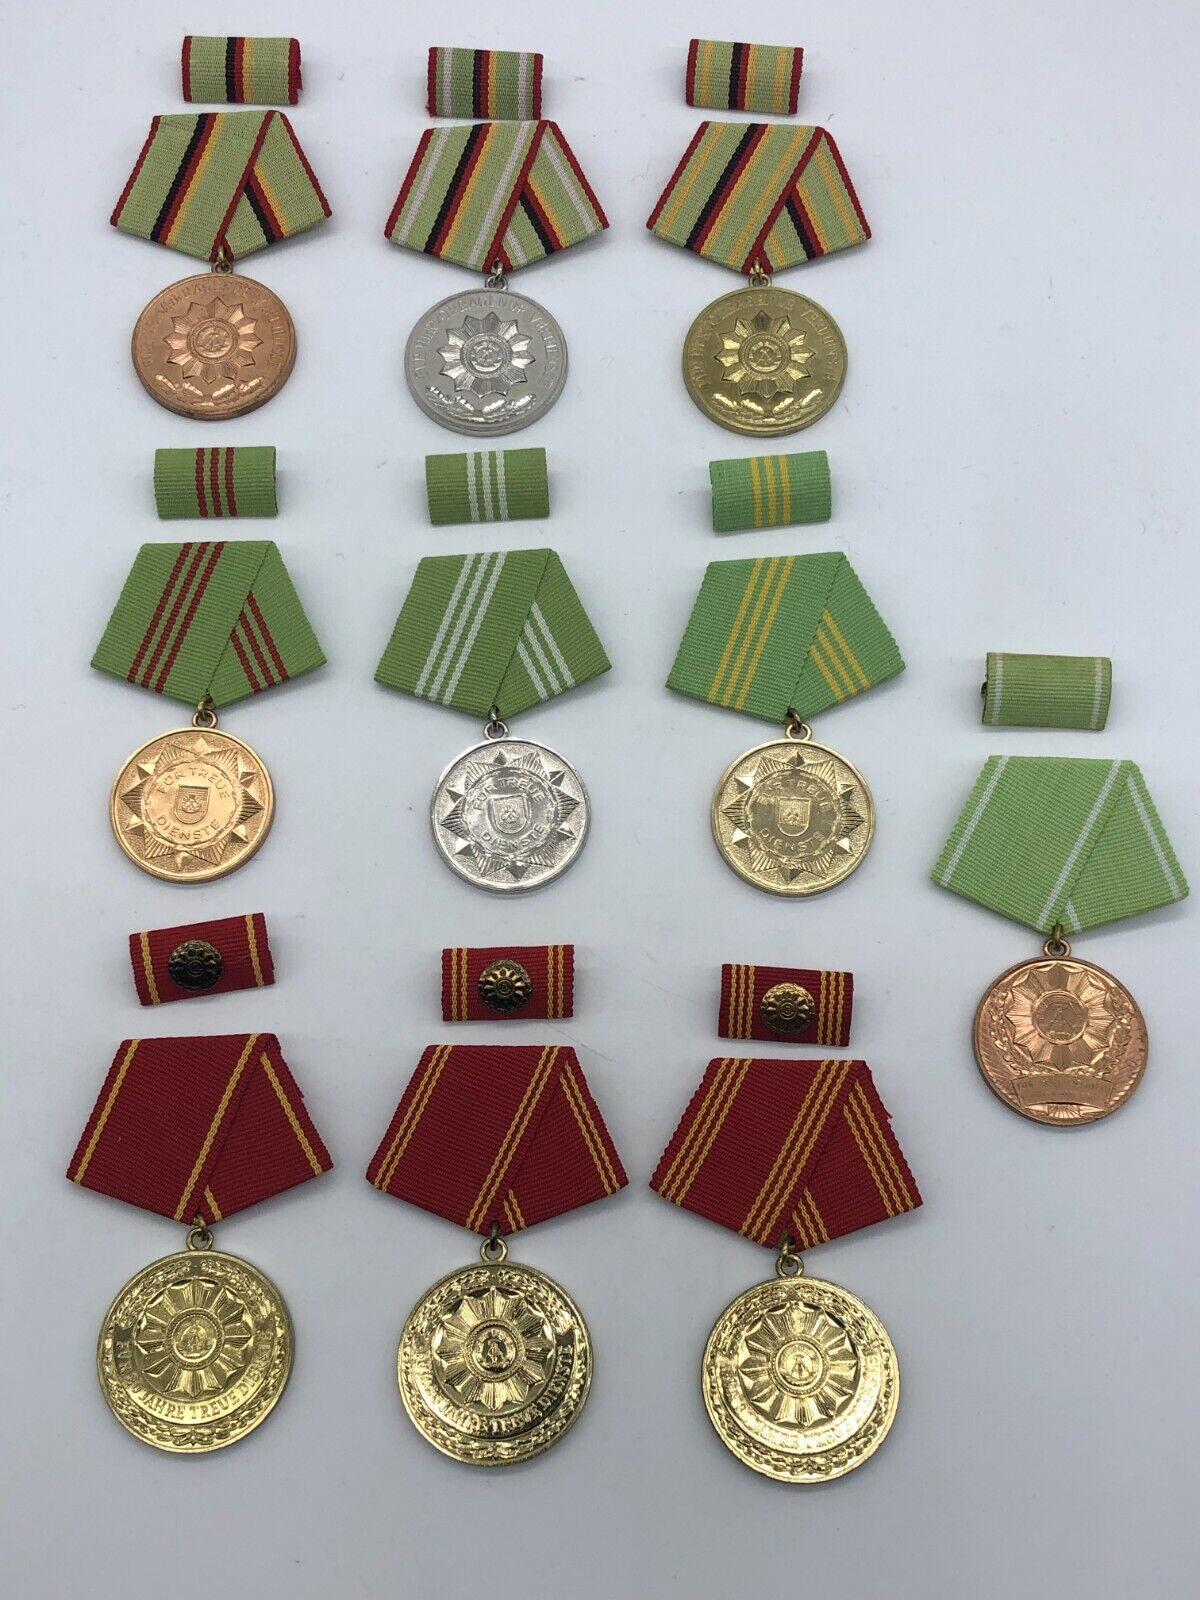 Vintage East German Police Service and Achievement Medals Set of 10 - 